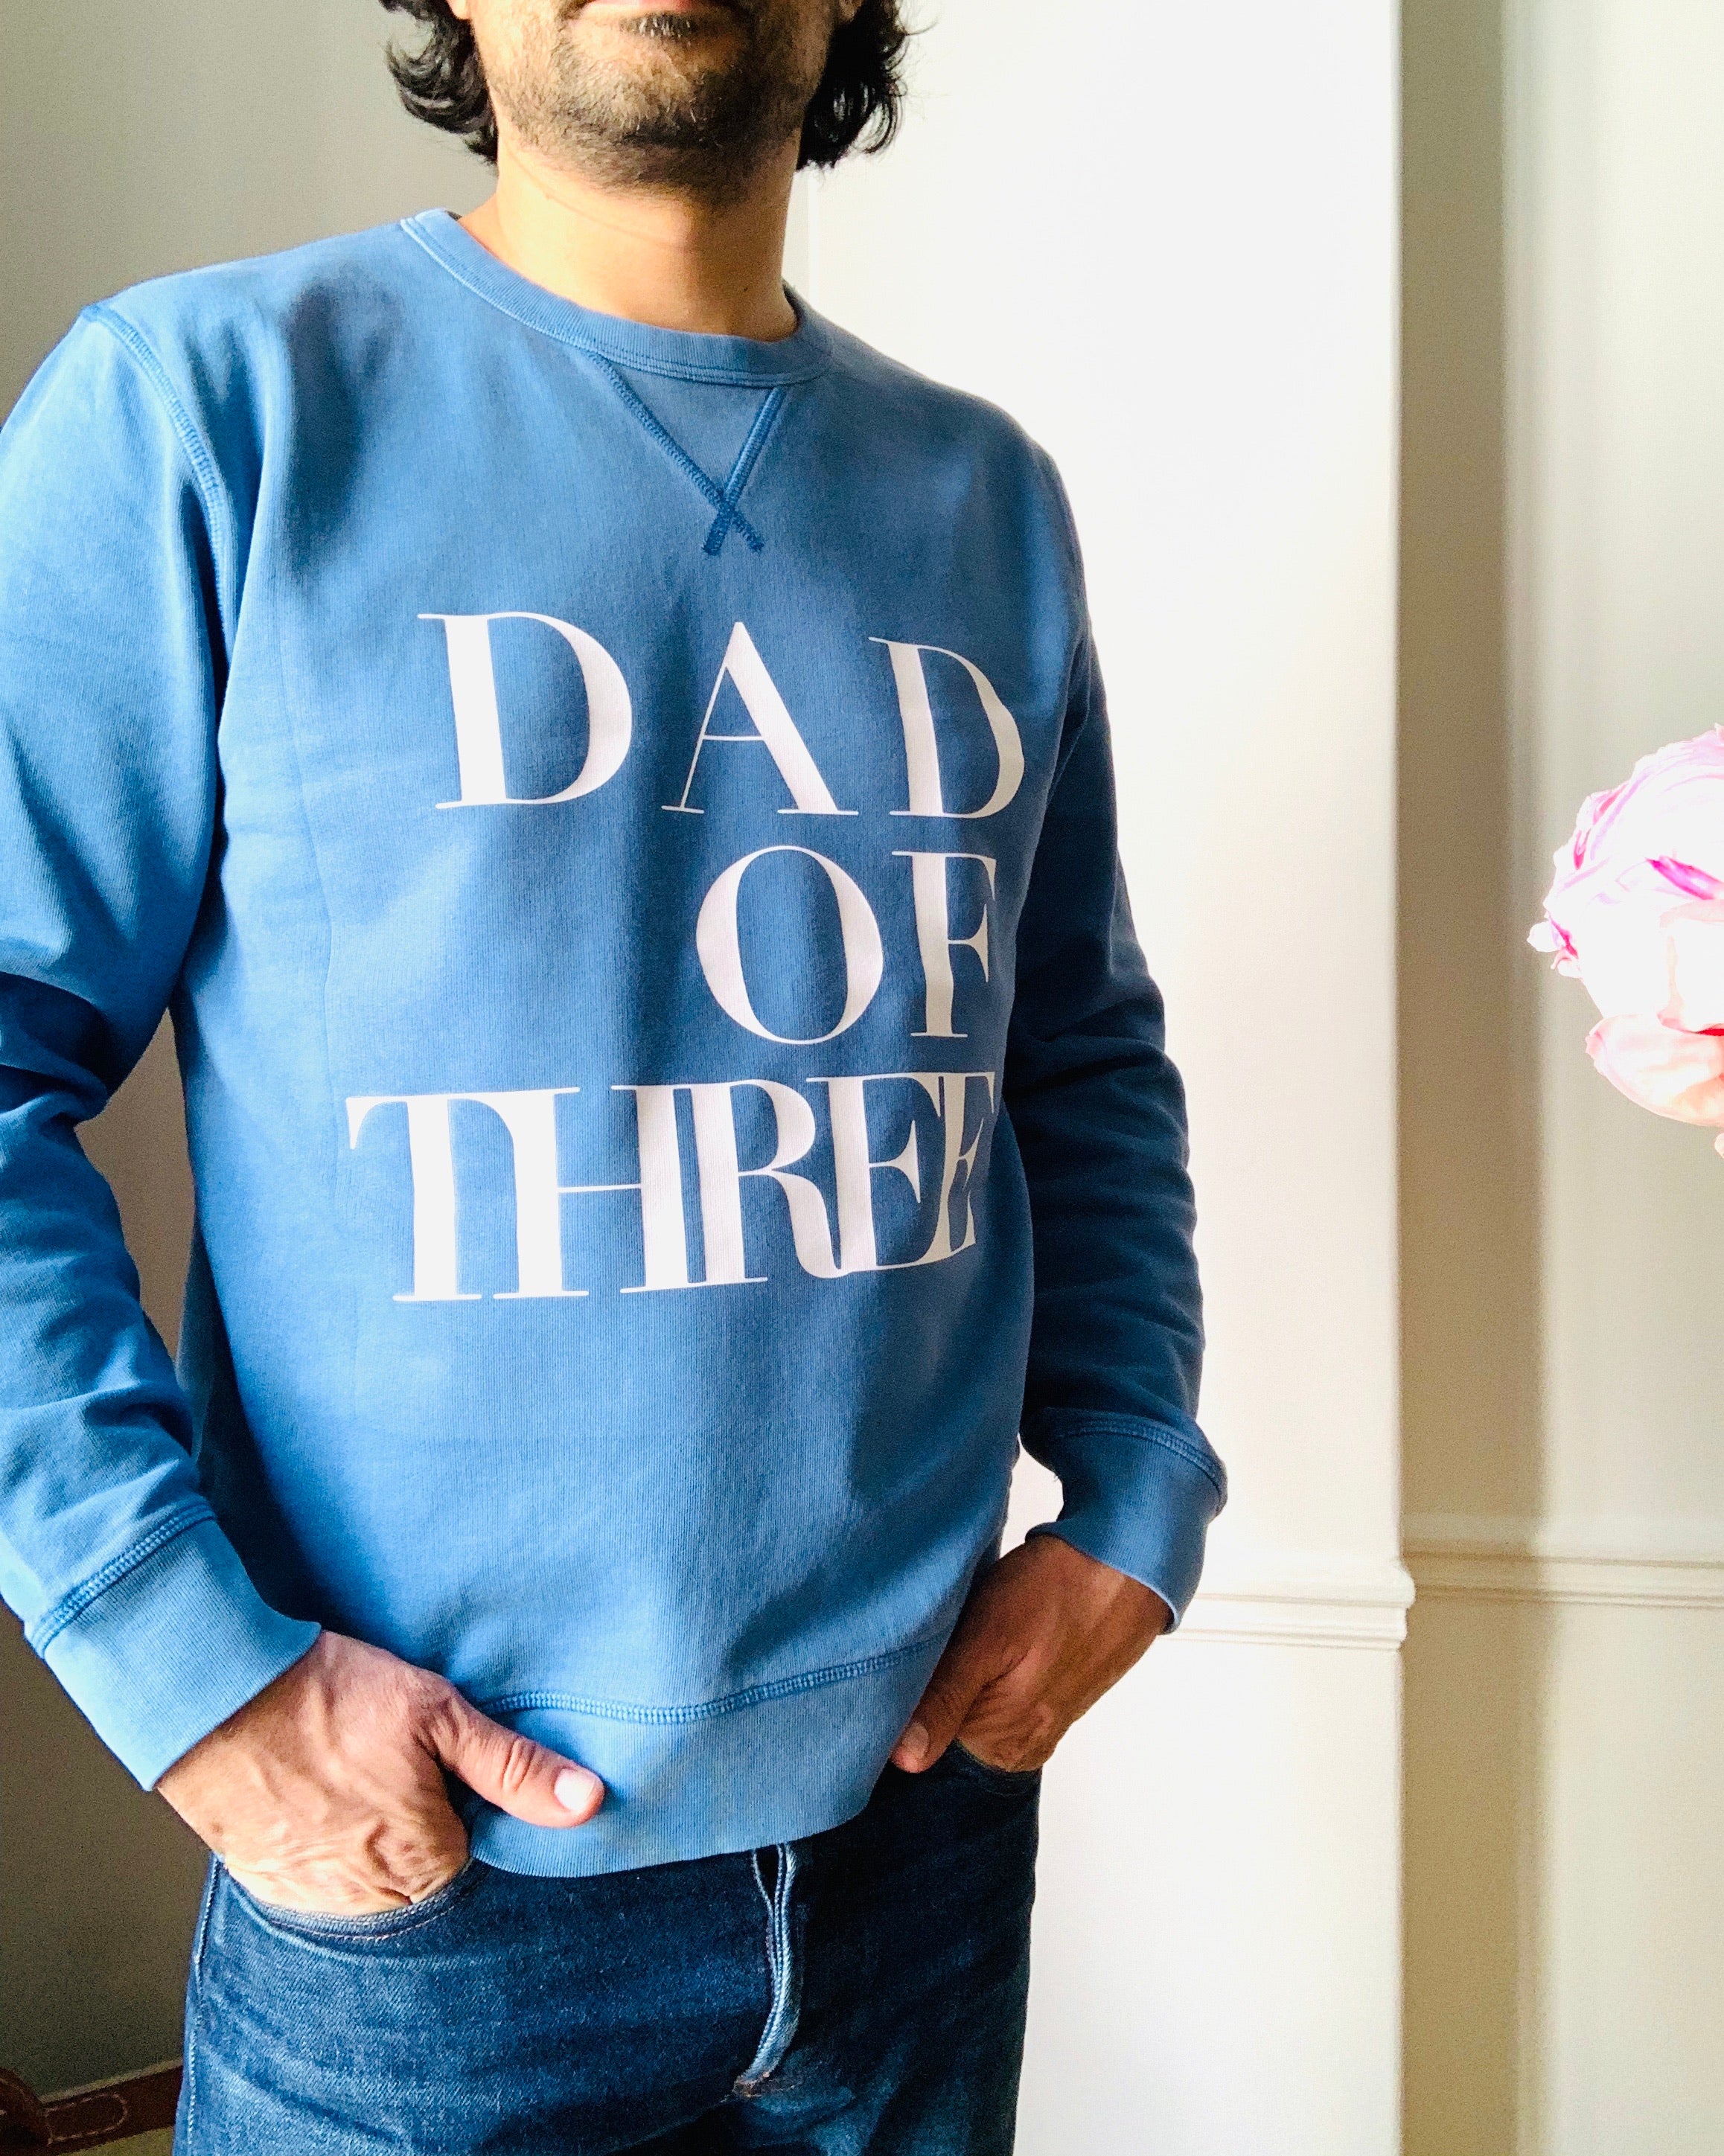 SWEAT SHIRT DAD OF ONE, DAD OF TWO, DAD OF THREE, FOUR... TWINS: VINTAGE BLUE